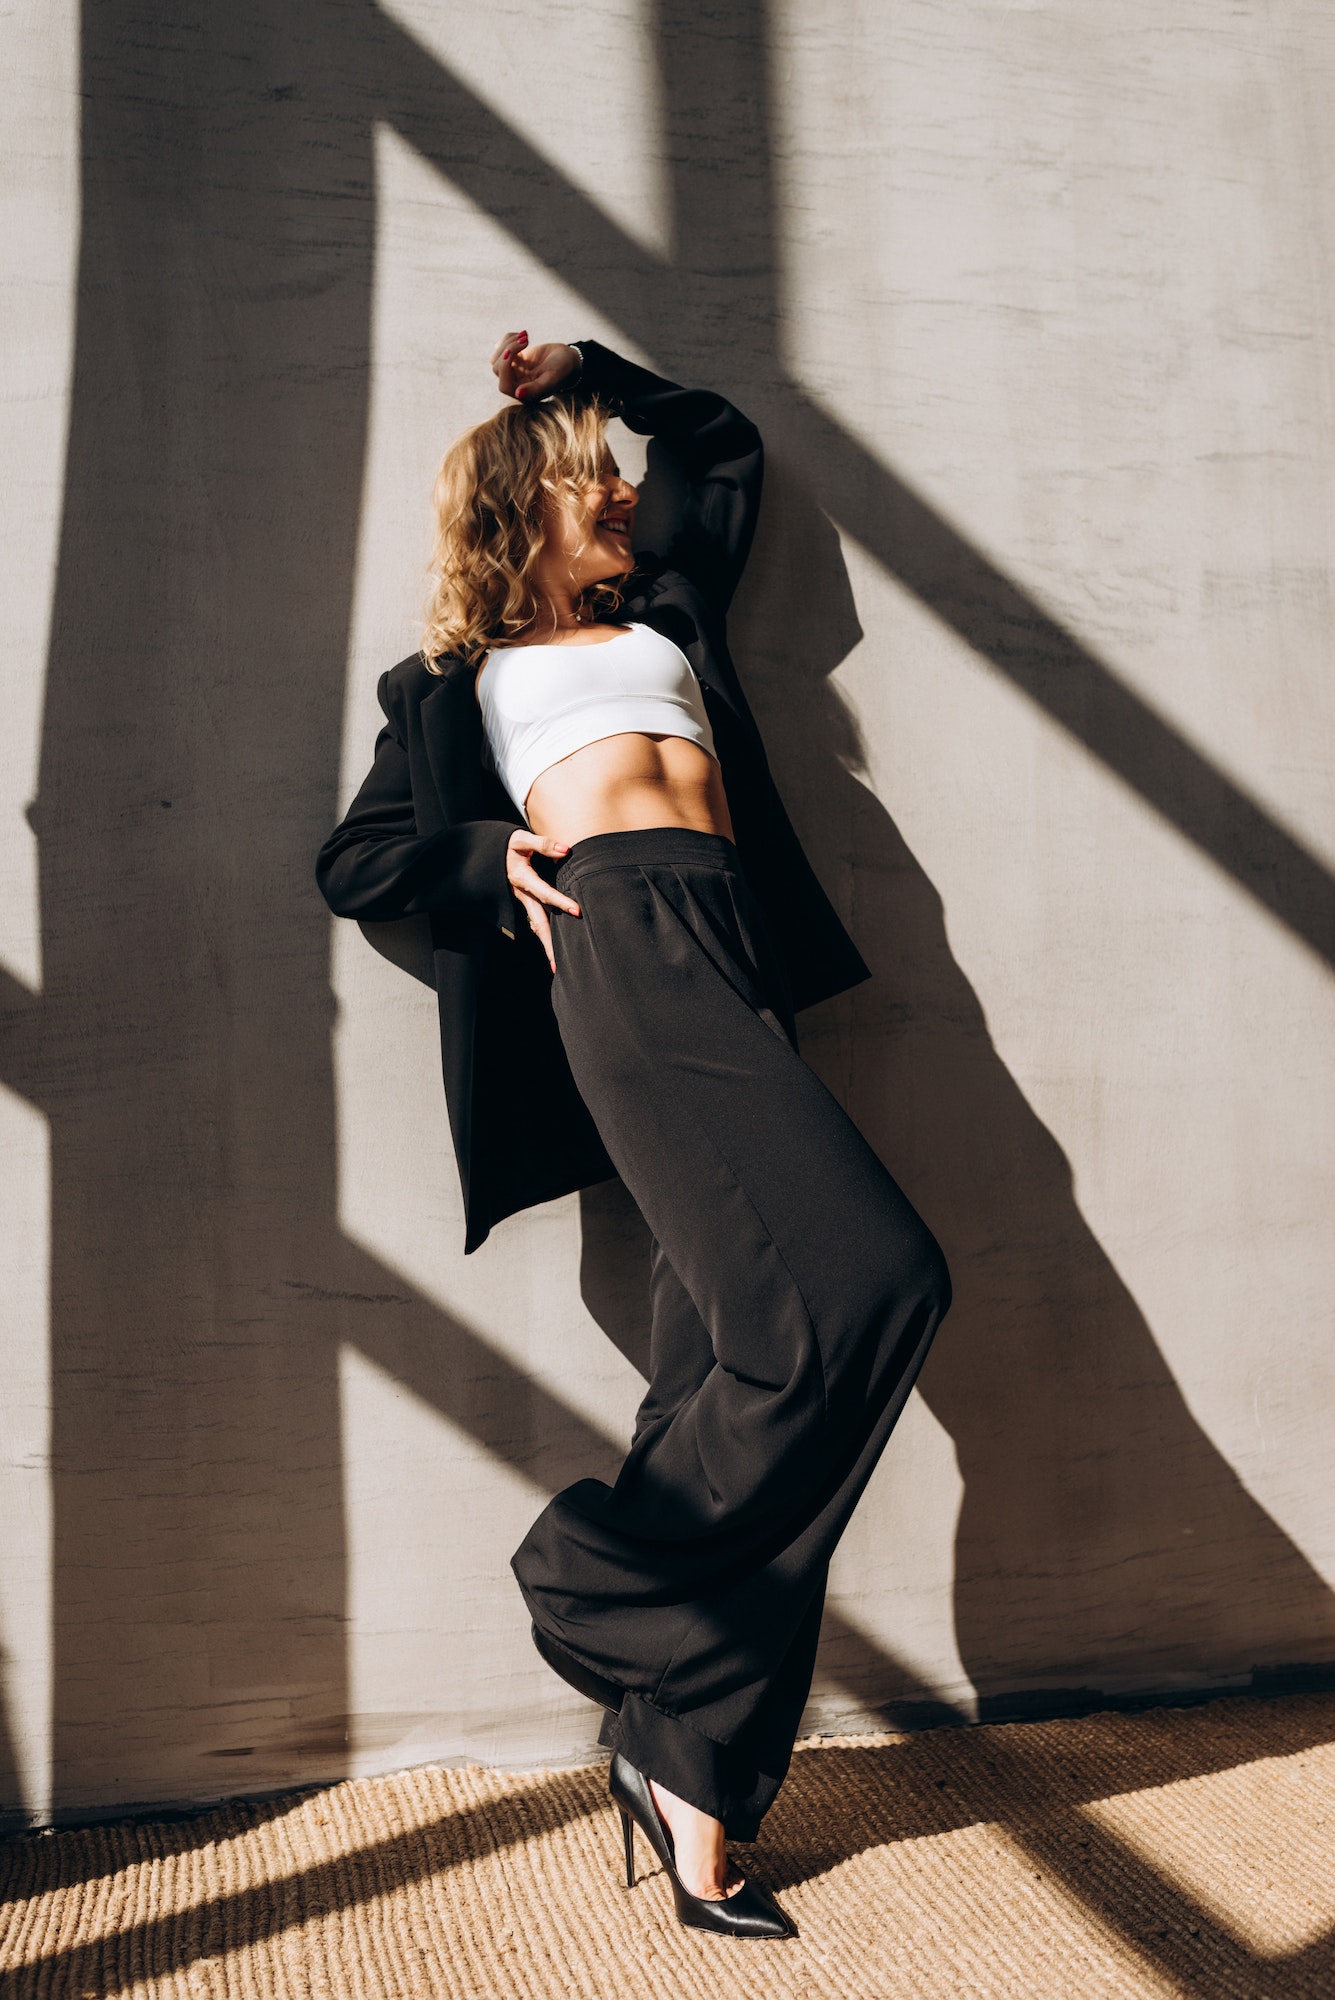 A young slender woman in a black trouser suit posing in the sunlight